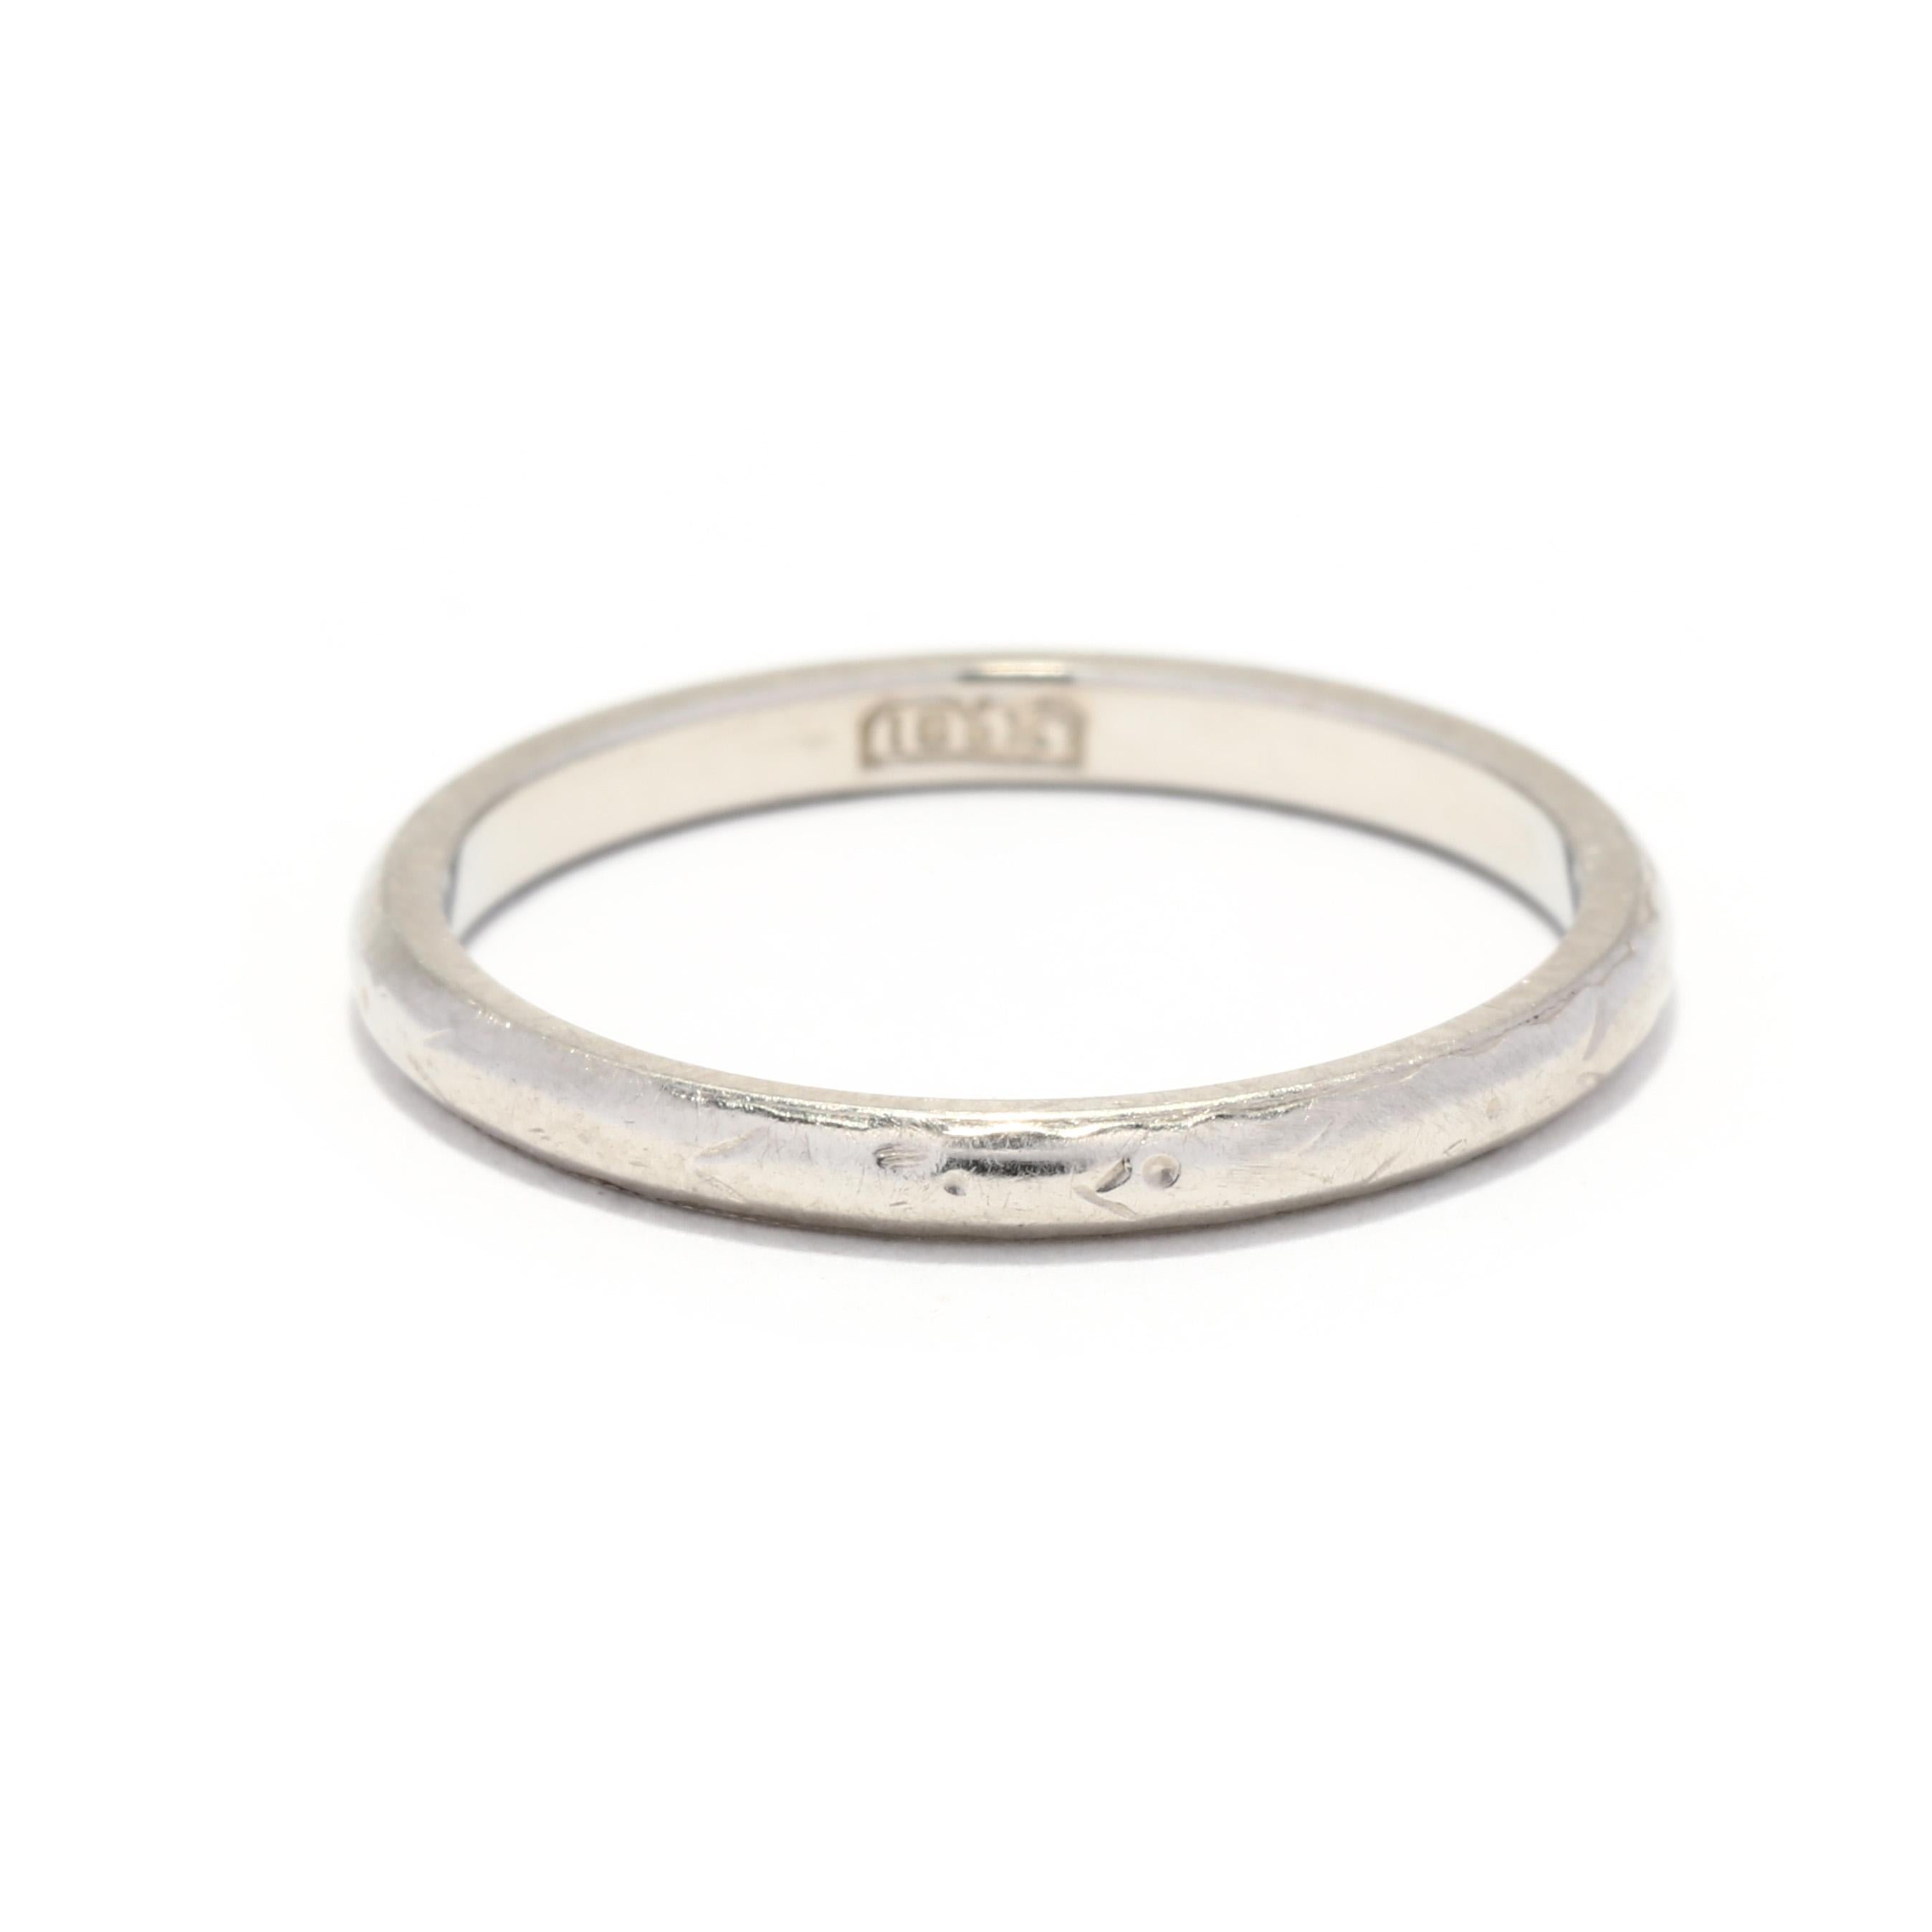 An antique 18 karat white gold engraved wedding band. This thin band features a lightly engraved floral band in an eternity design.

Ring Size 5.25

Width: 2 mm

Weight: 1.2 dwts.

Ring Sizings & Modifications:
*Please reach out before your purchase